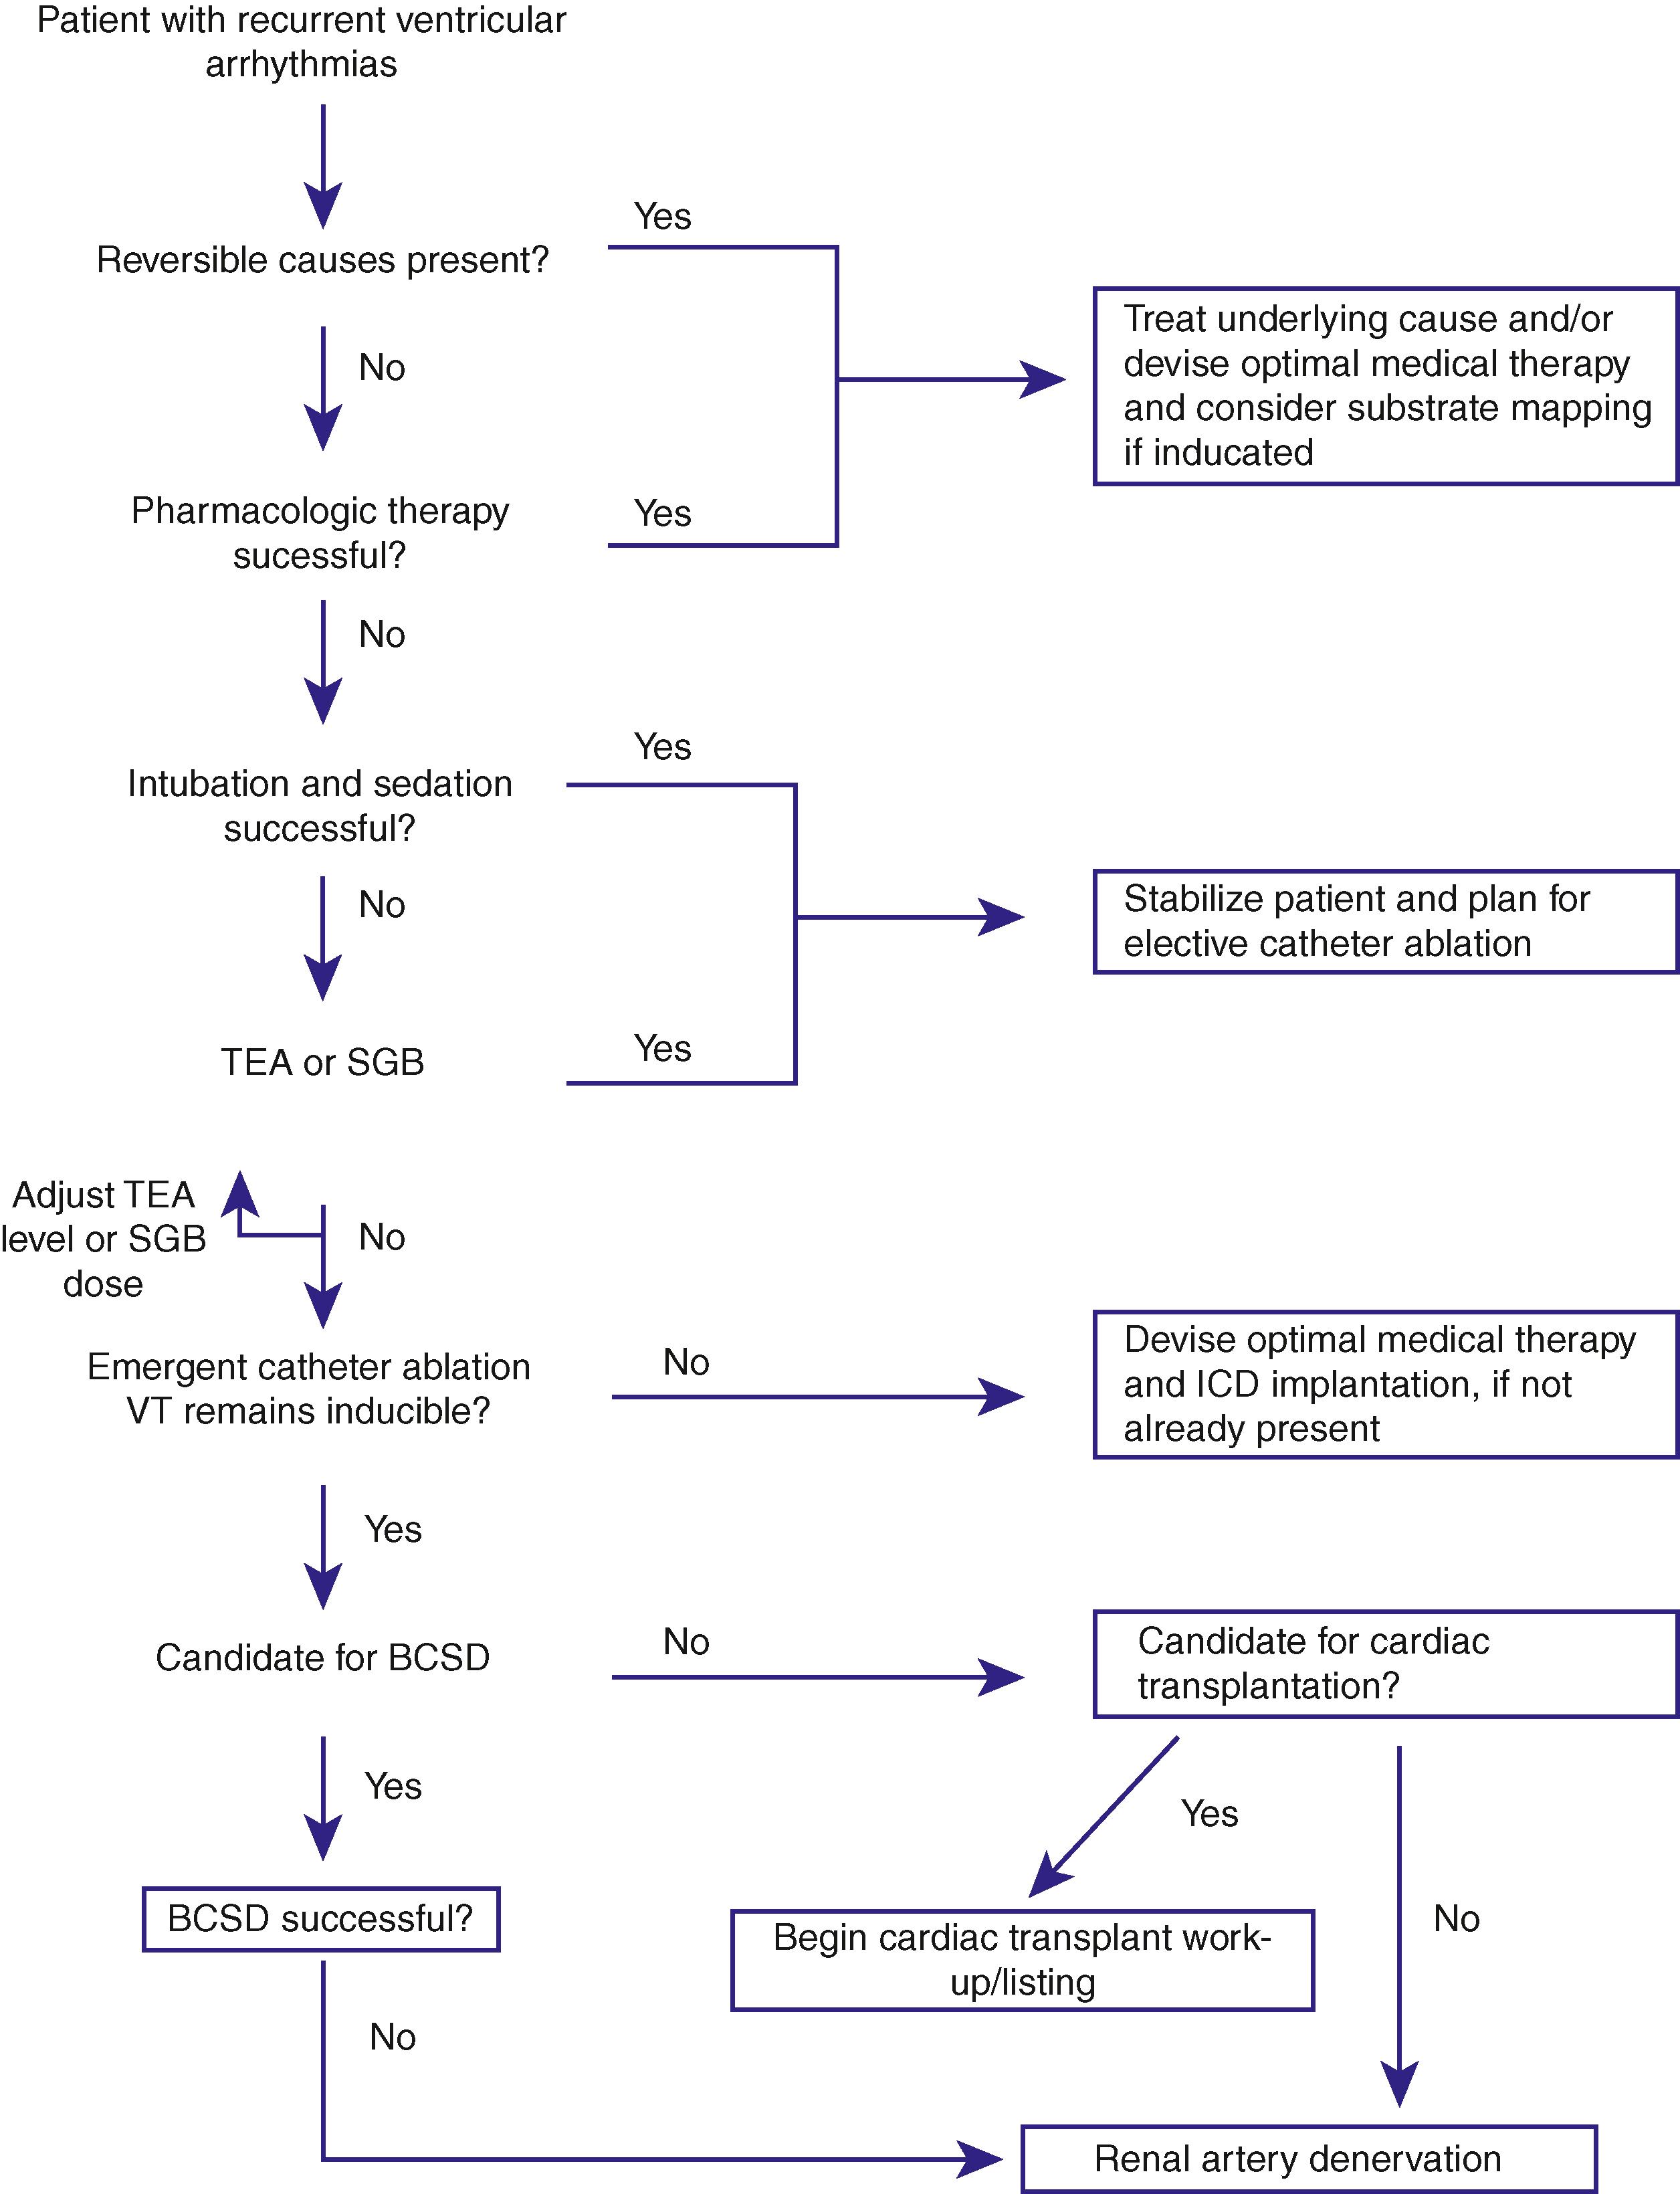 Fig. 137.4, Strategy for management of patients with refractory ventricular arrhythmias.